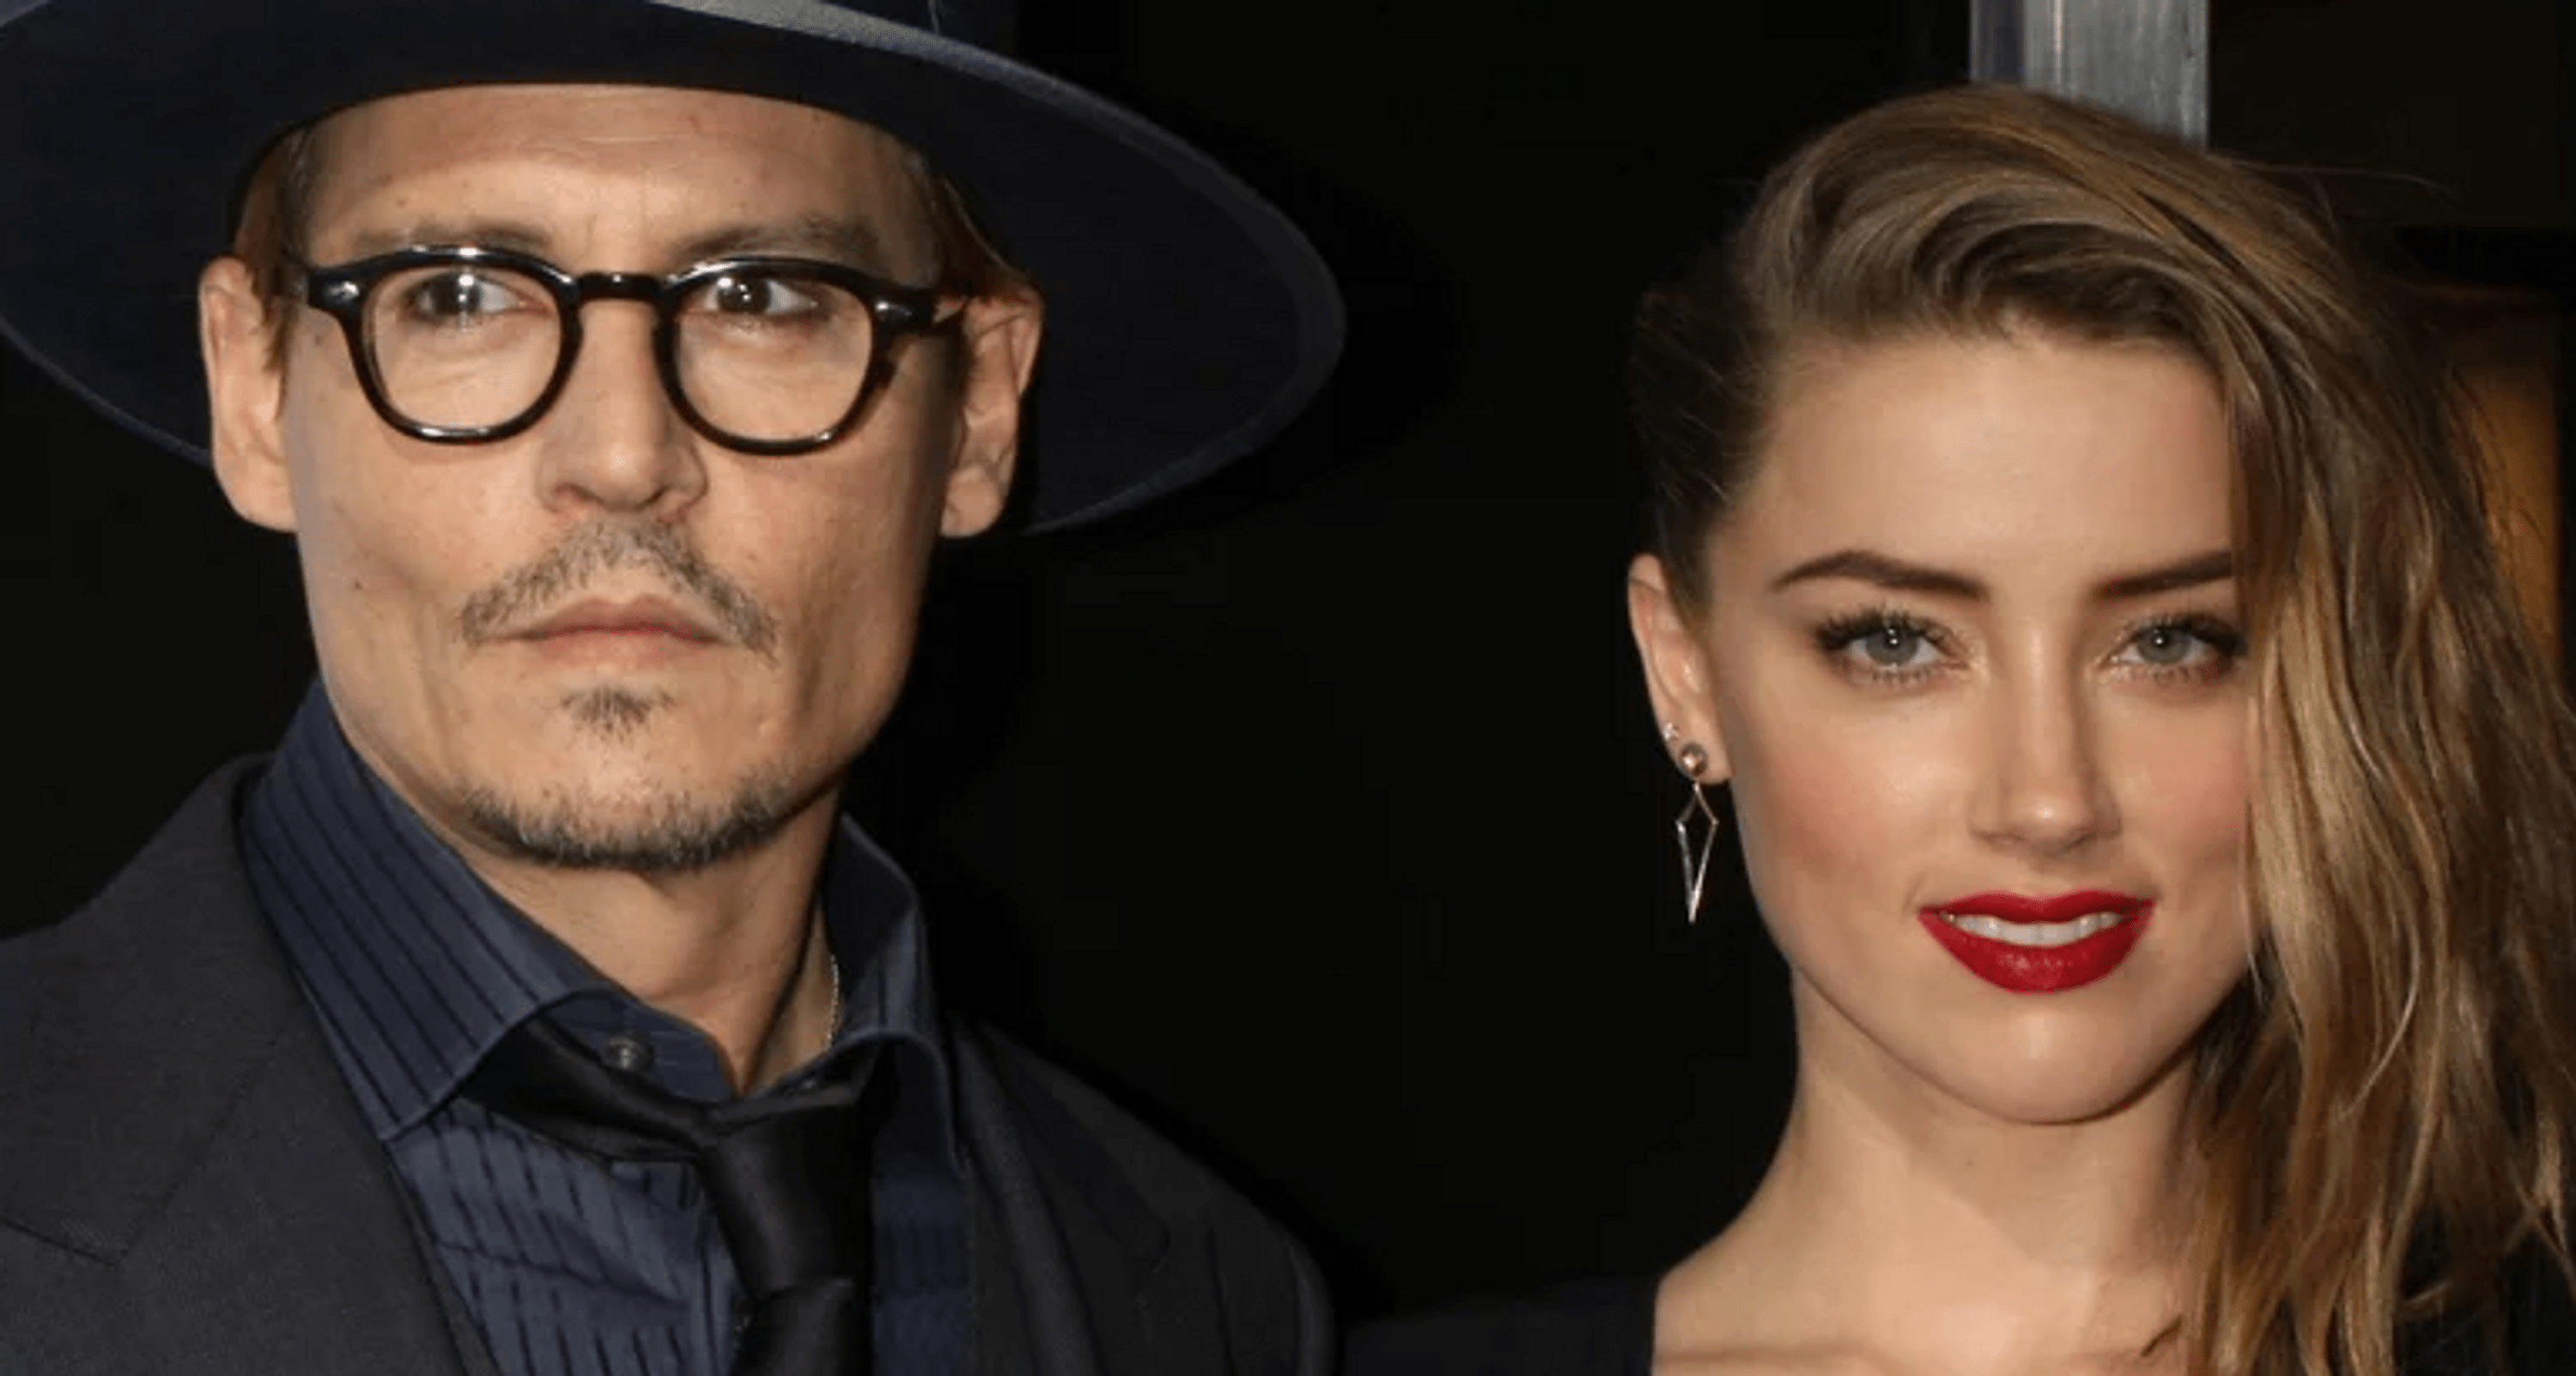 After marrying Amber Heard, Johnny Depp changed the name of his yacht